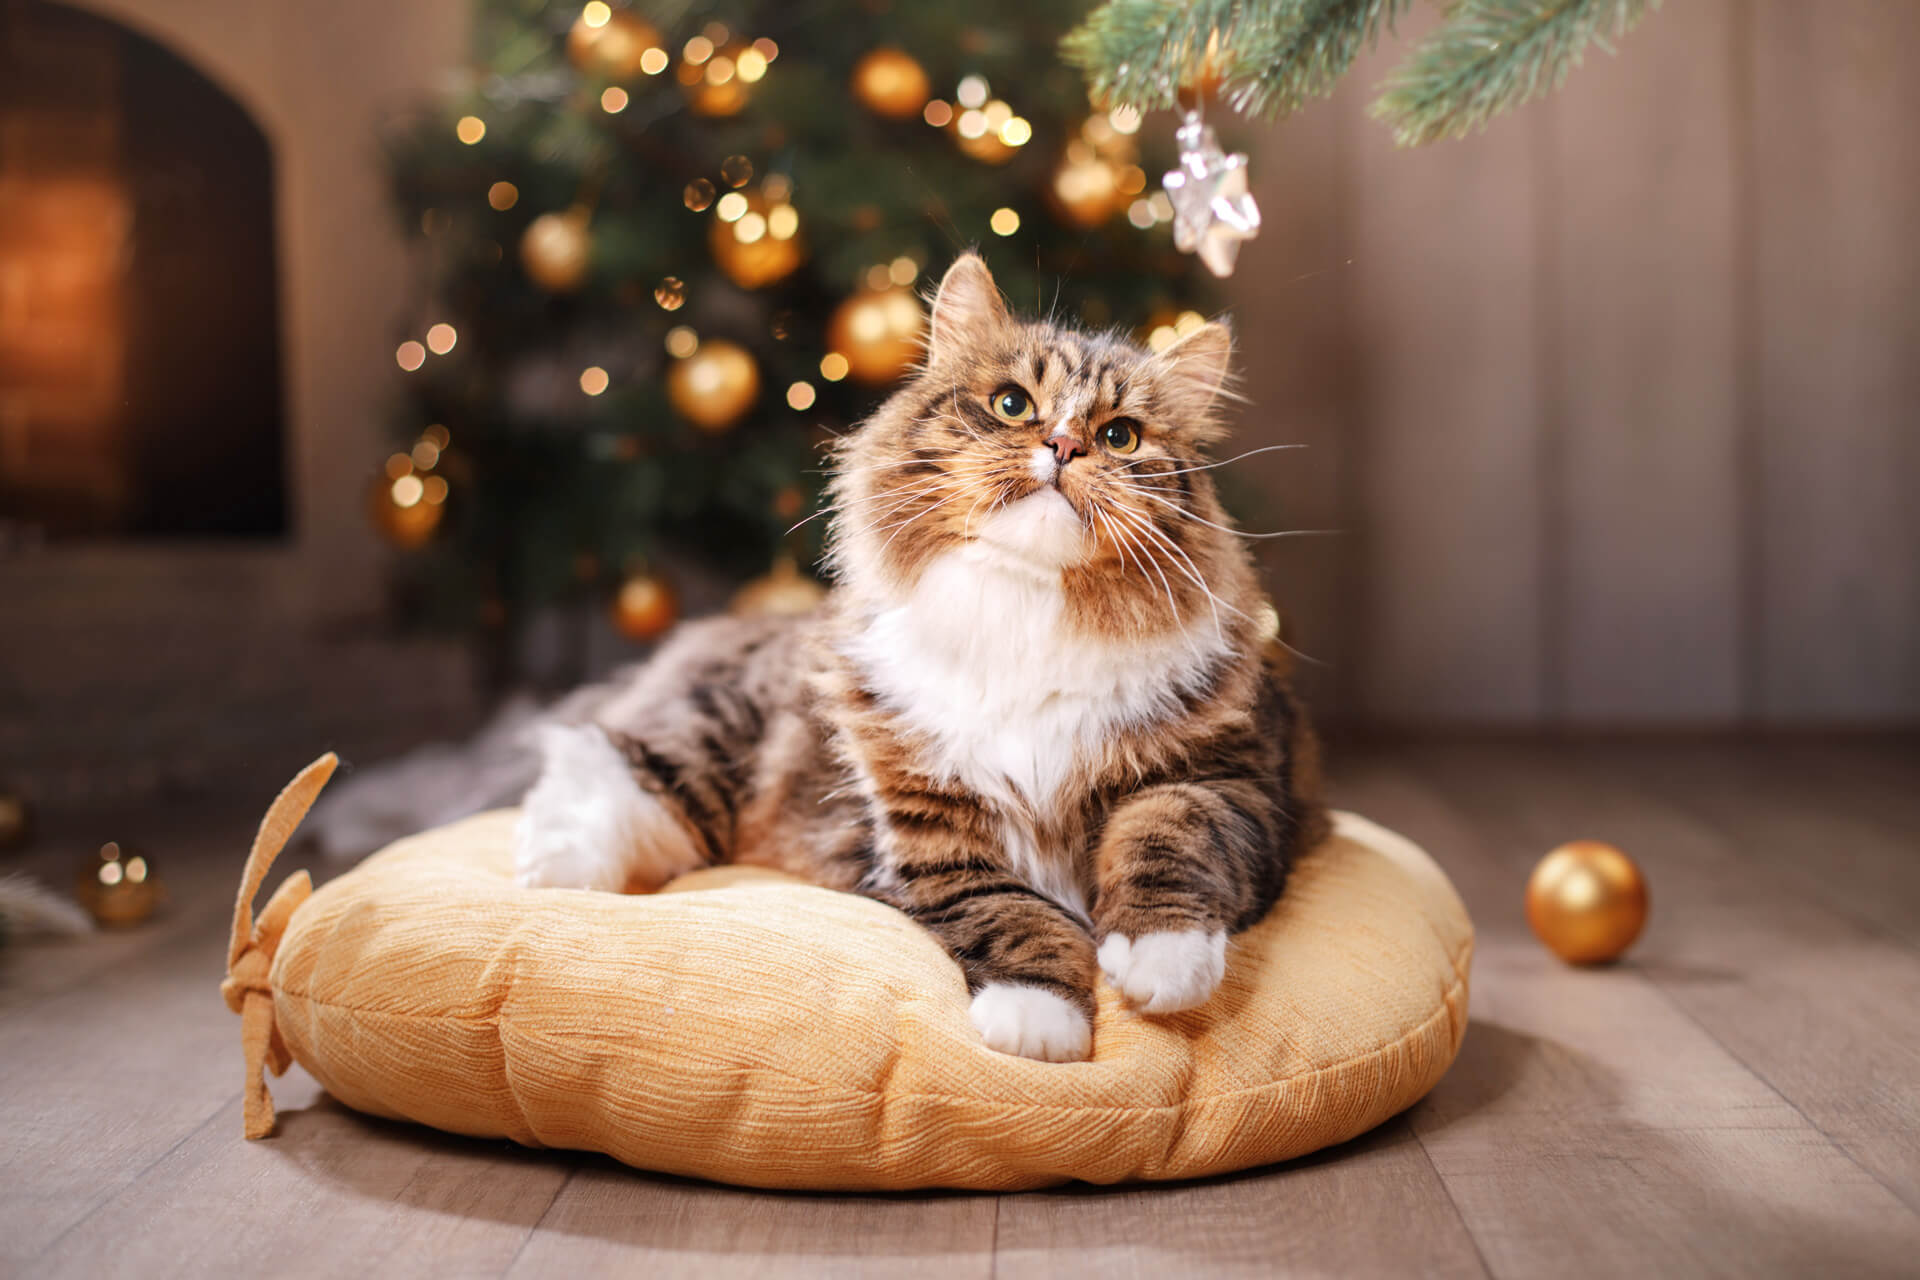 The 5 best gifts for cat owners